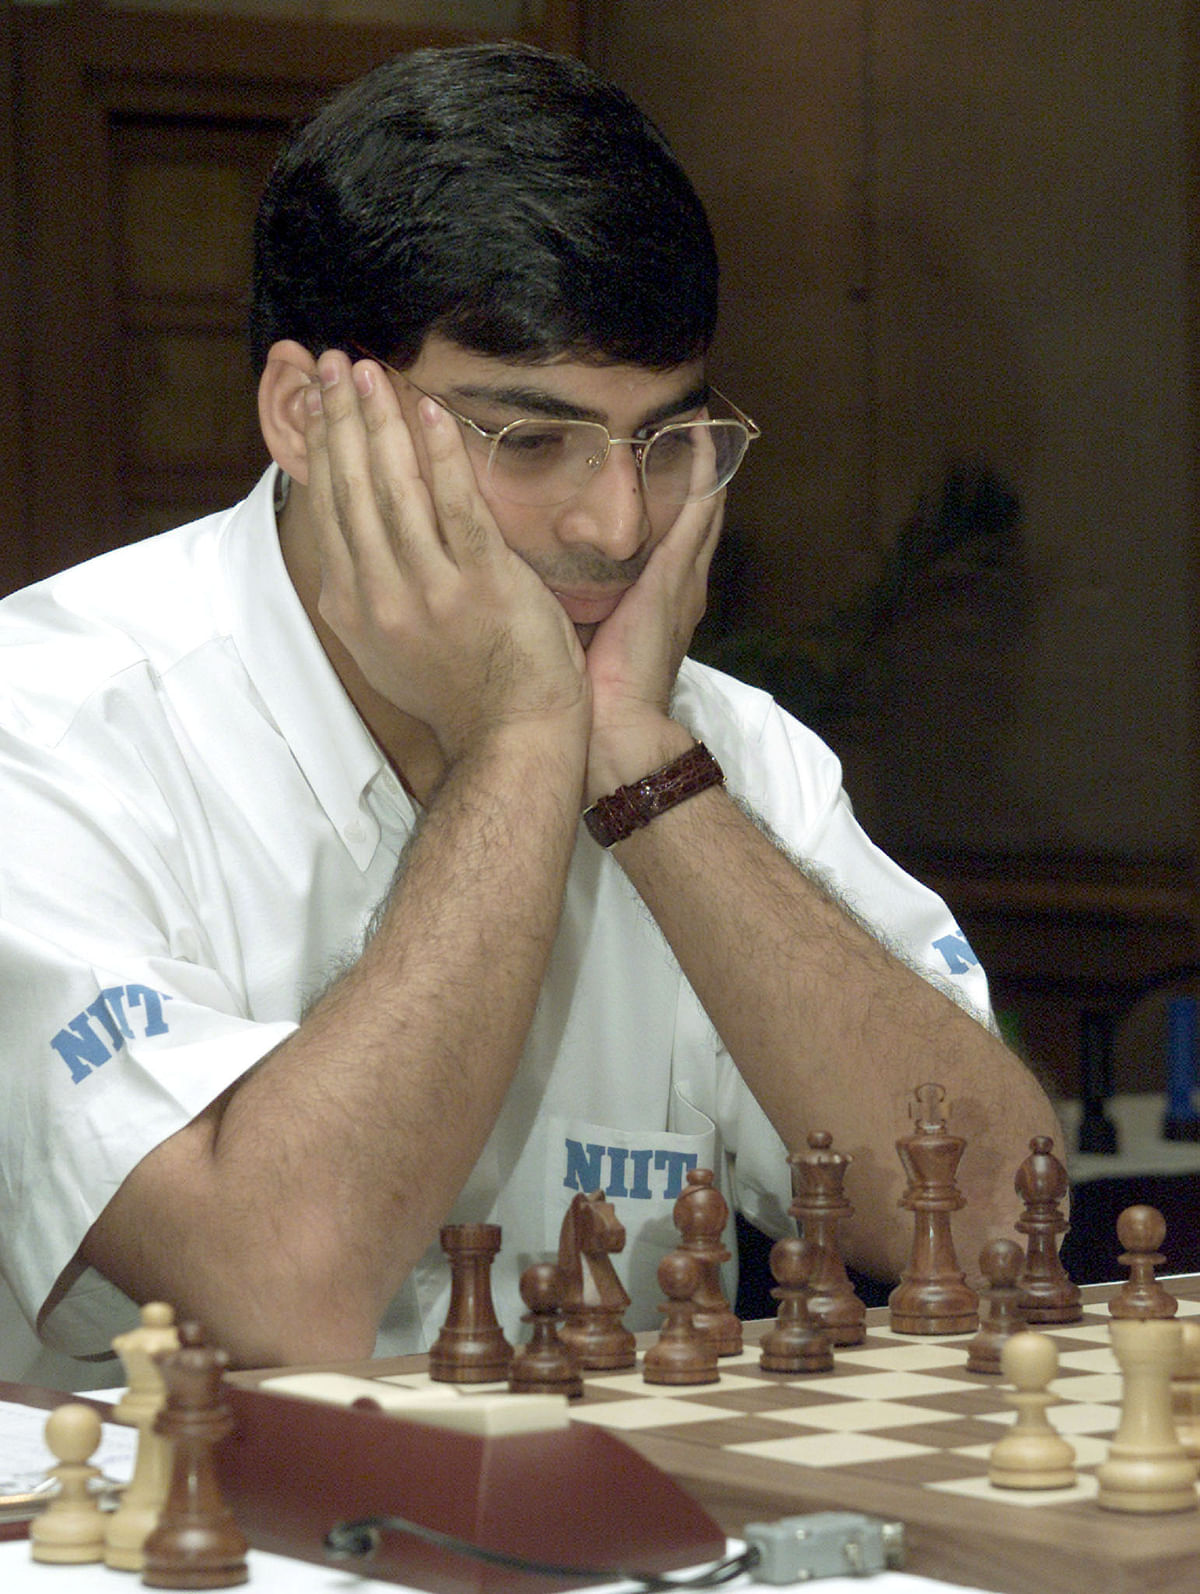 Vishwanathan Anand opens his account with a draw against Topalov of Bulgaria in the 3rd round of the Sinquefield Cup.